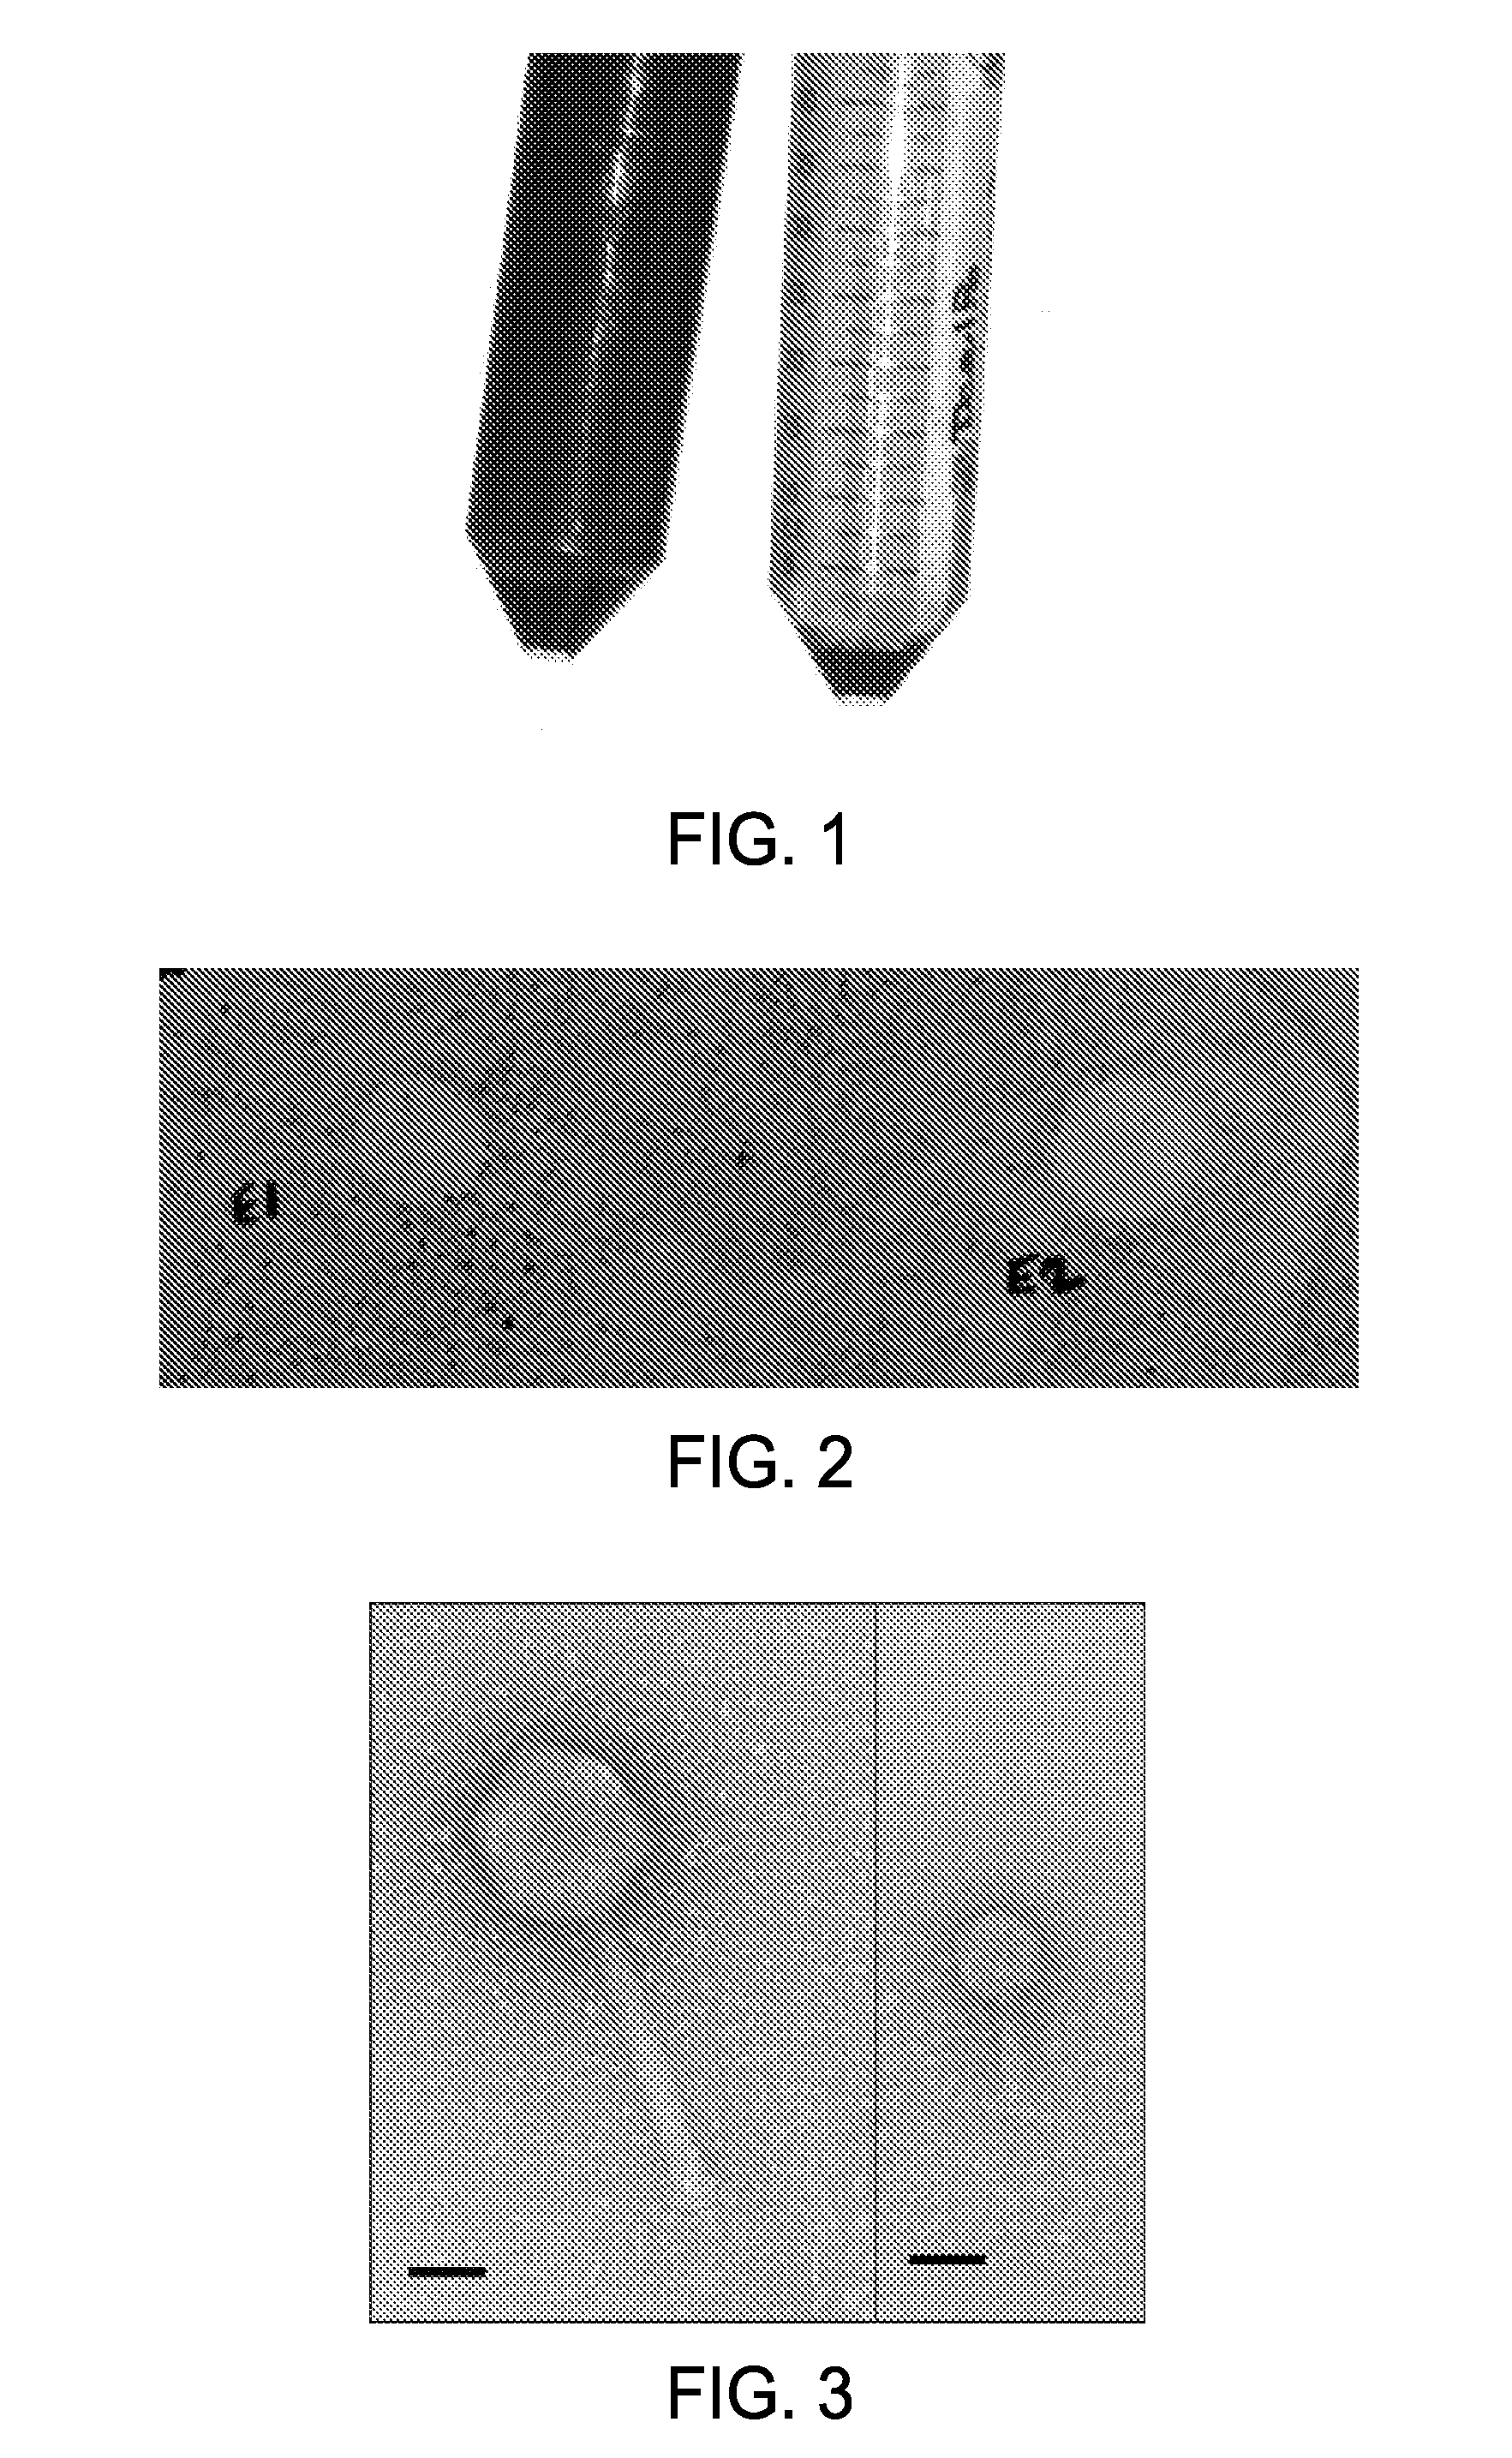 Compositions and methods for the treatment, mitigation and remediation of biocorrosion